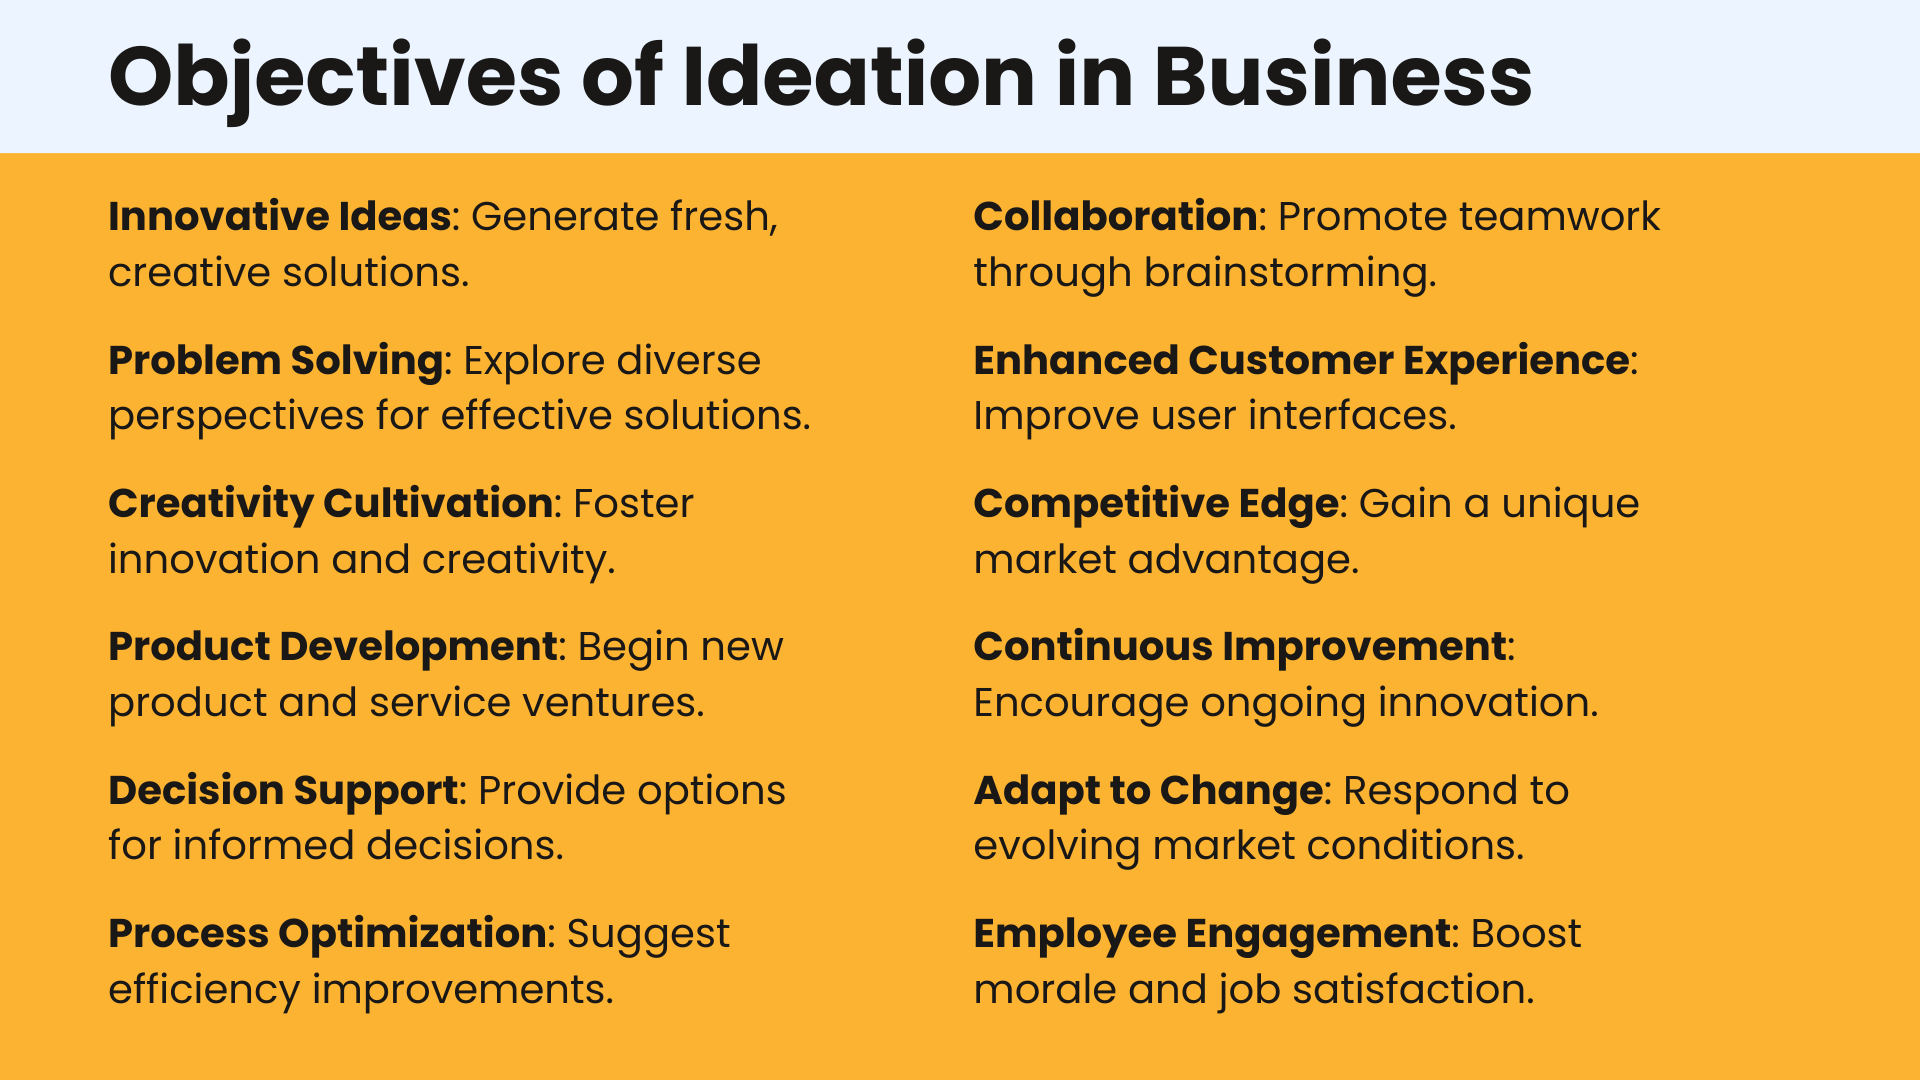 objective of ideation